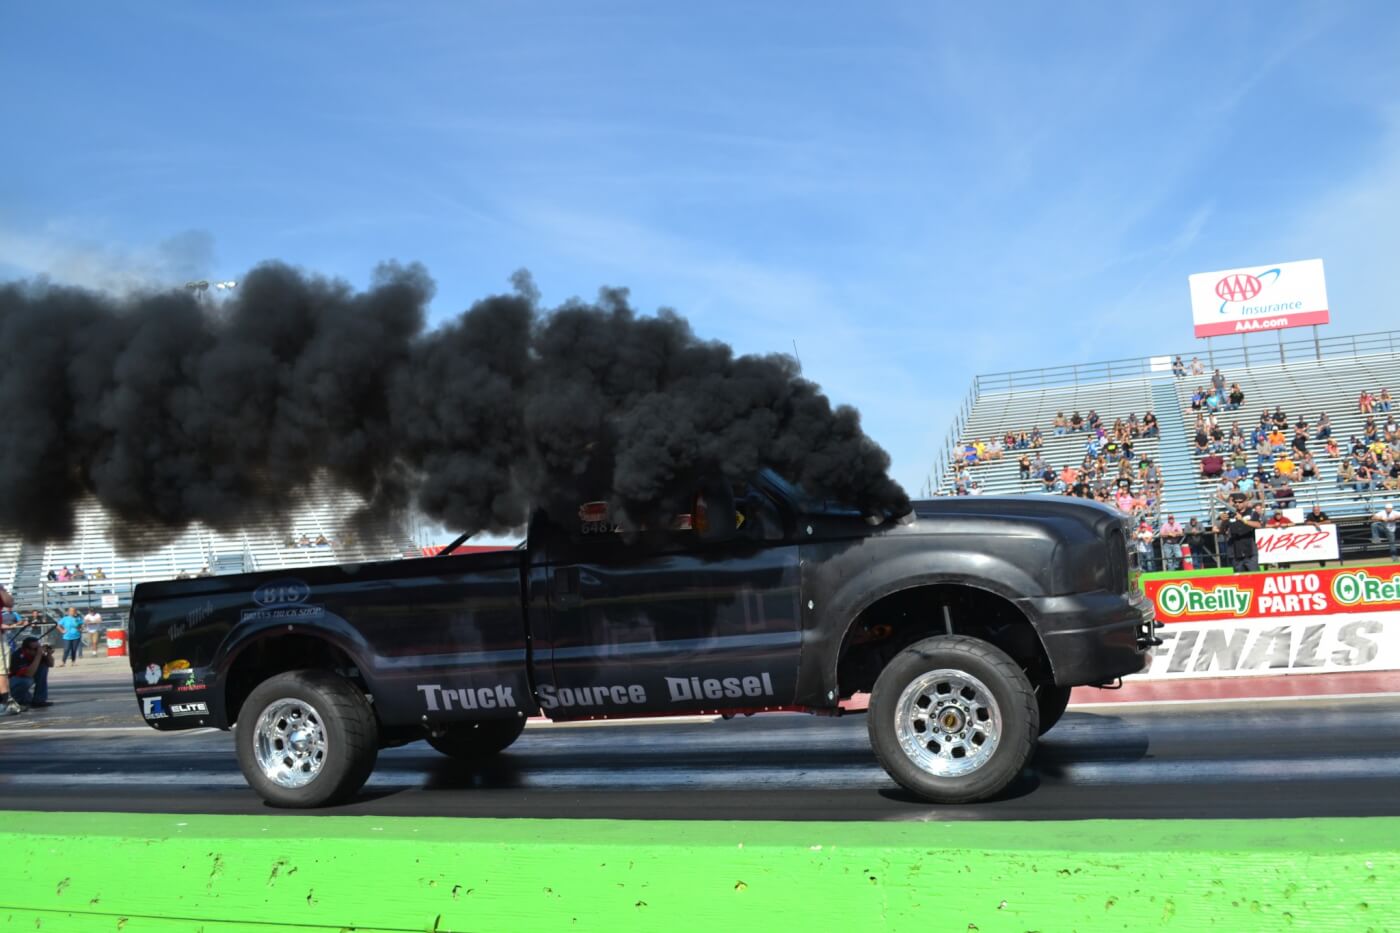 A step up from 10.90, the NHRDA's Super Street class is a heads-up category with a 6,000-pound minimum weight. It attracted some of the fastest four-wheel drives in the country, like Truck Source Diesel's awesome 9-second triple turbo Cummins-powered Ford.